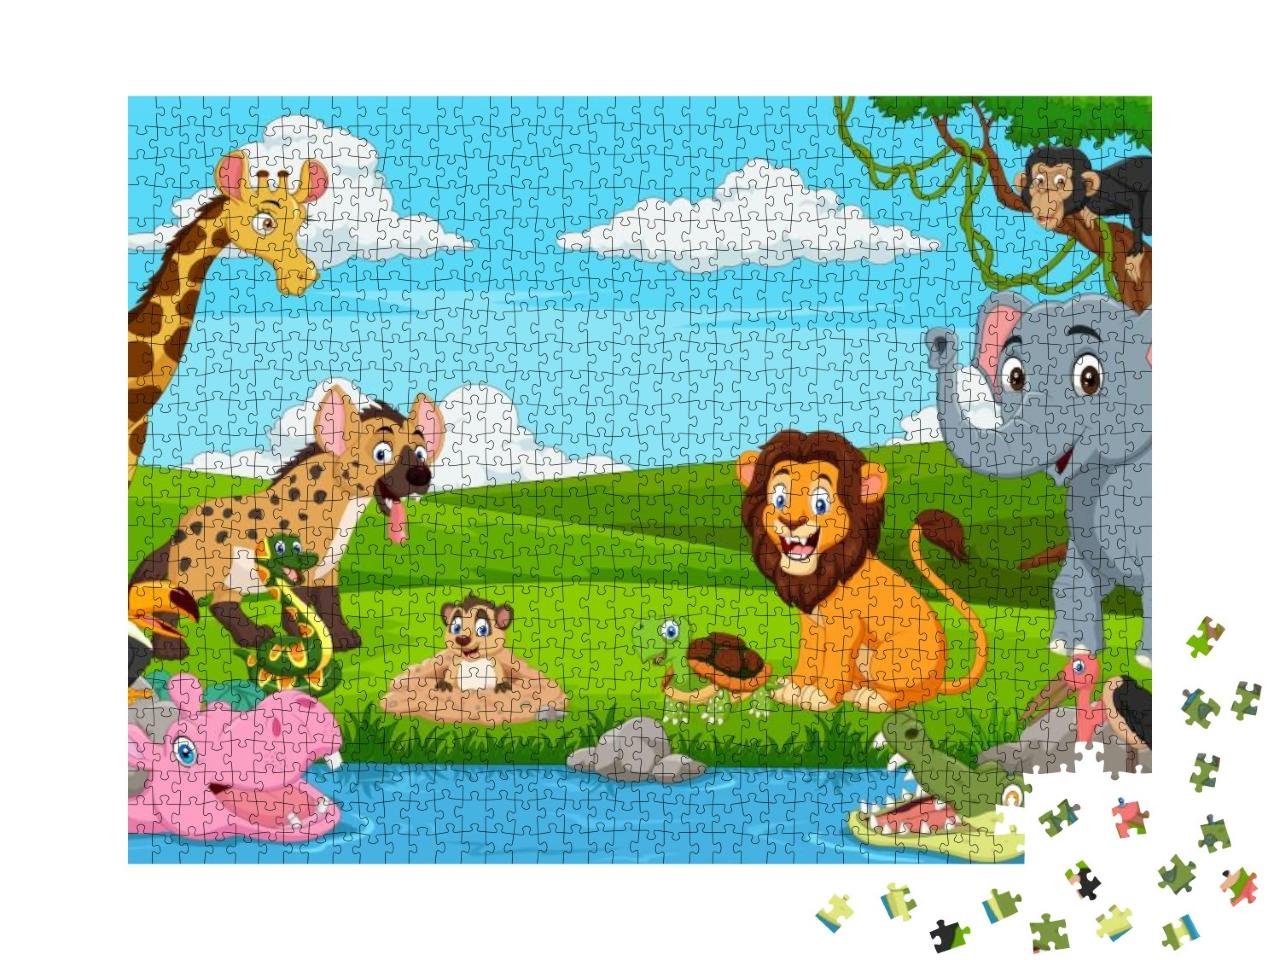 Cartoon African Landscape with Wild Animals... Jigsaw Puzzle with 1000 pieces